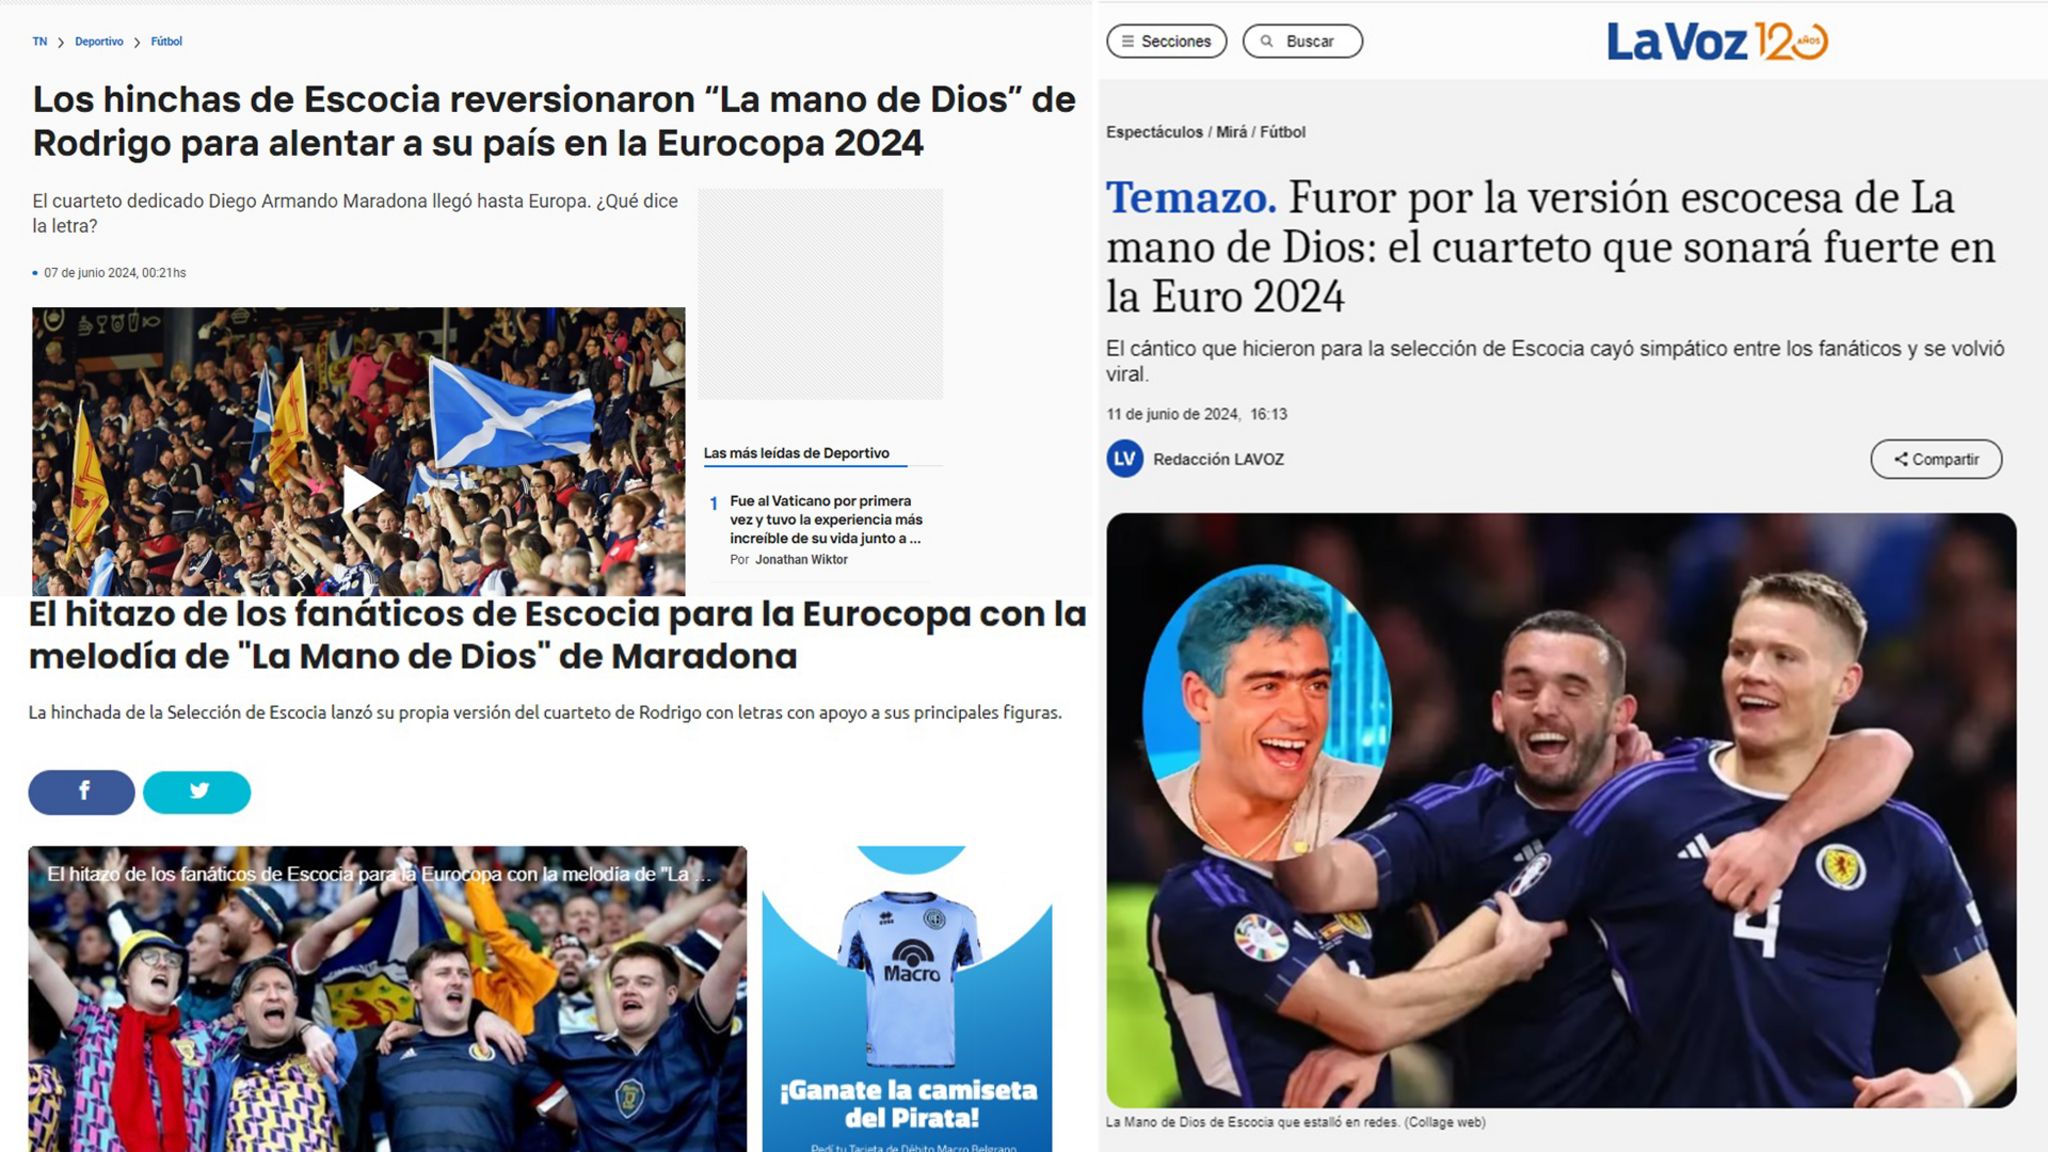 A collage of Argentina media outlets reporting on the song